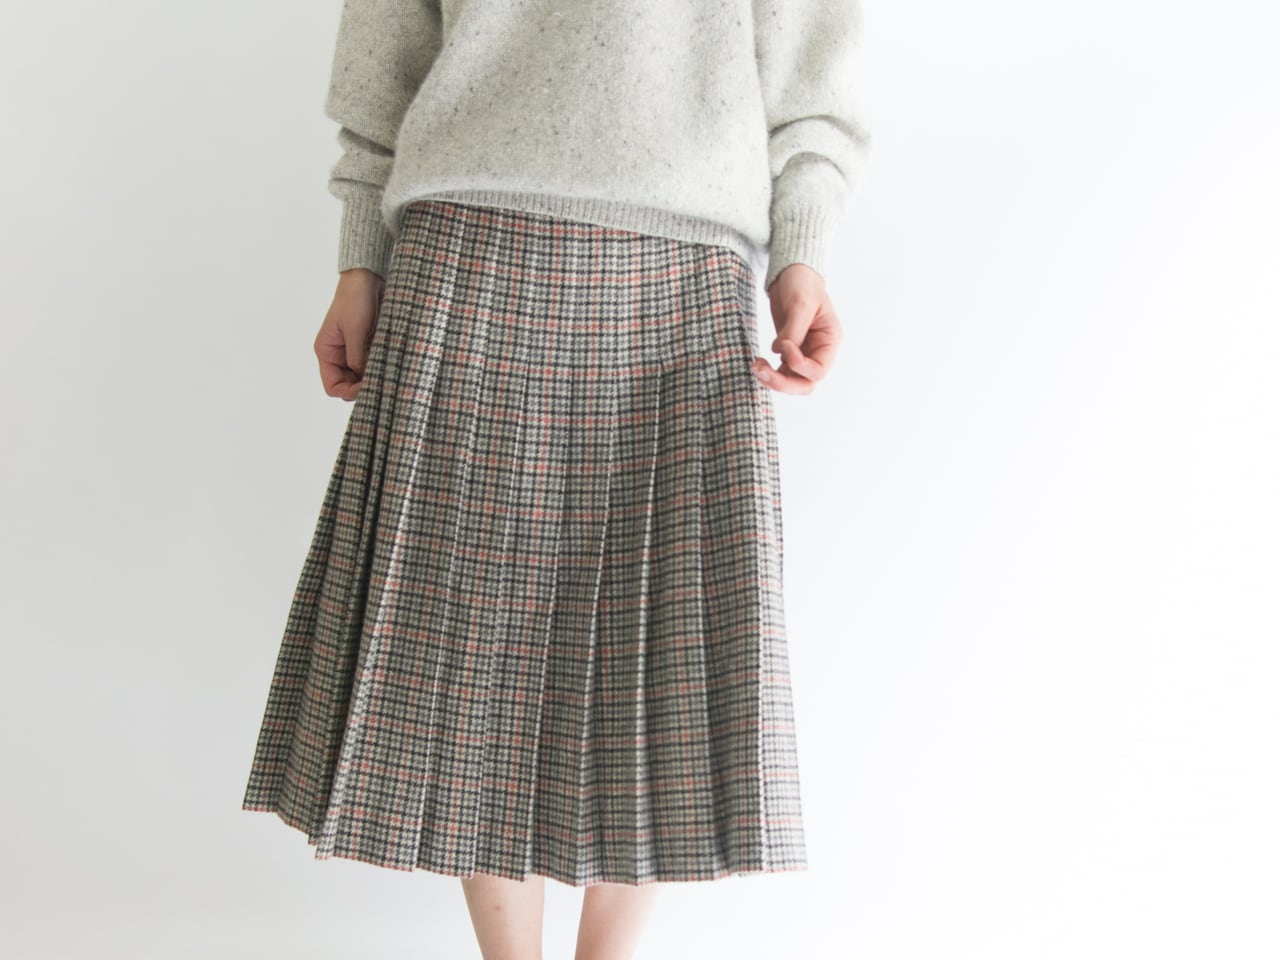 【GIVENCHY】Made in Japan classic pleated skirt（ジバンシー日本製クラシックプリーツスカート）1c